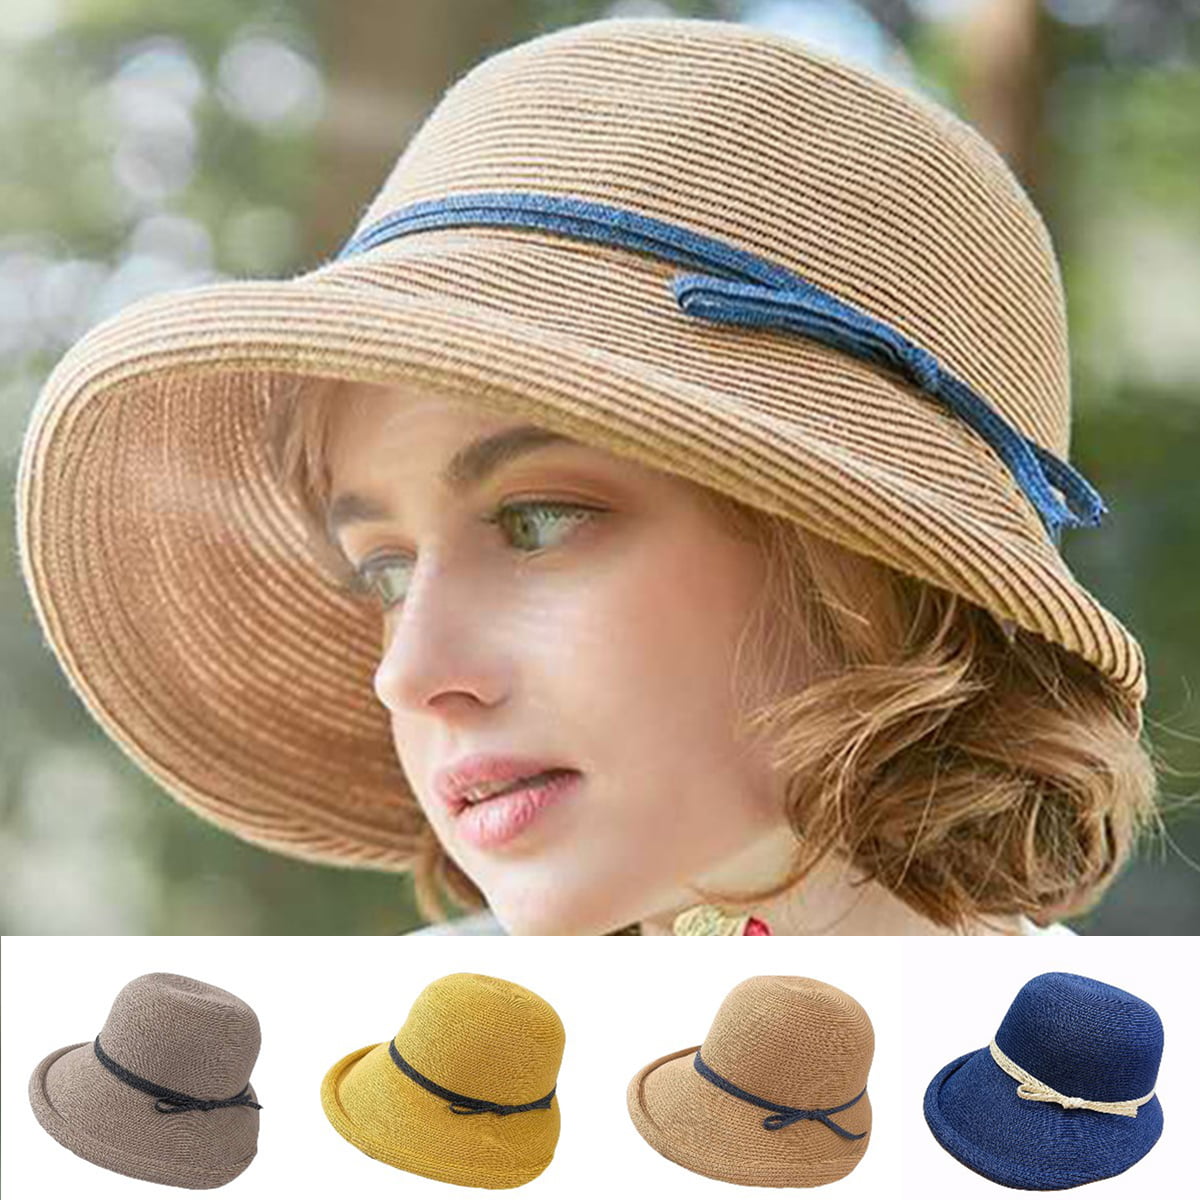 Sun Hats for Women with Ponytail Hole, Wide Brim Beach Hats for Women, Floppy Straw Hat Foldable, Packable Summer Hats Women